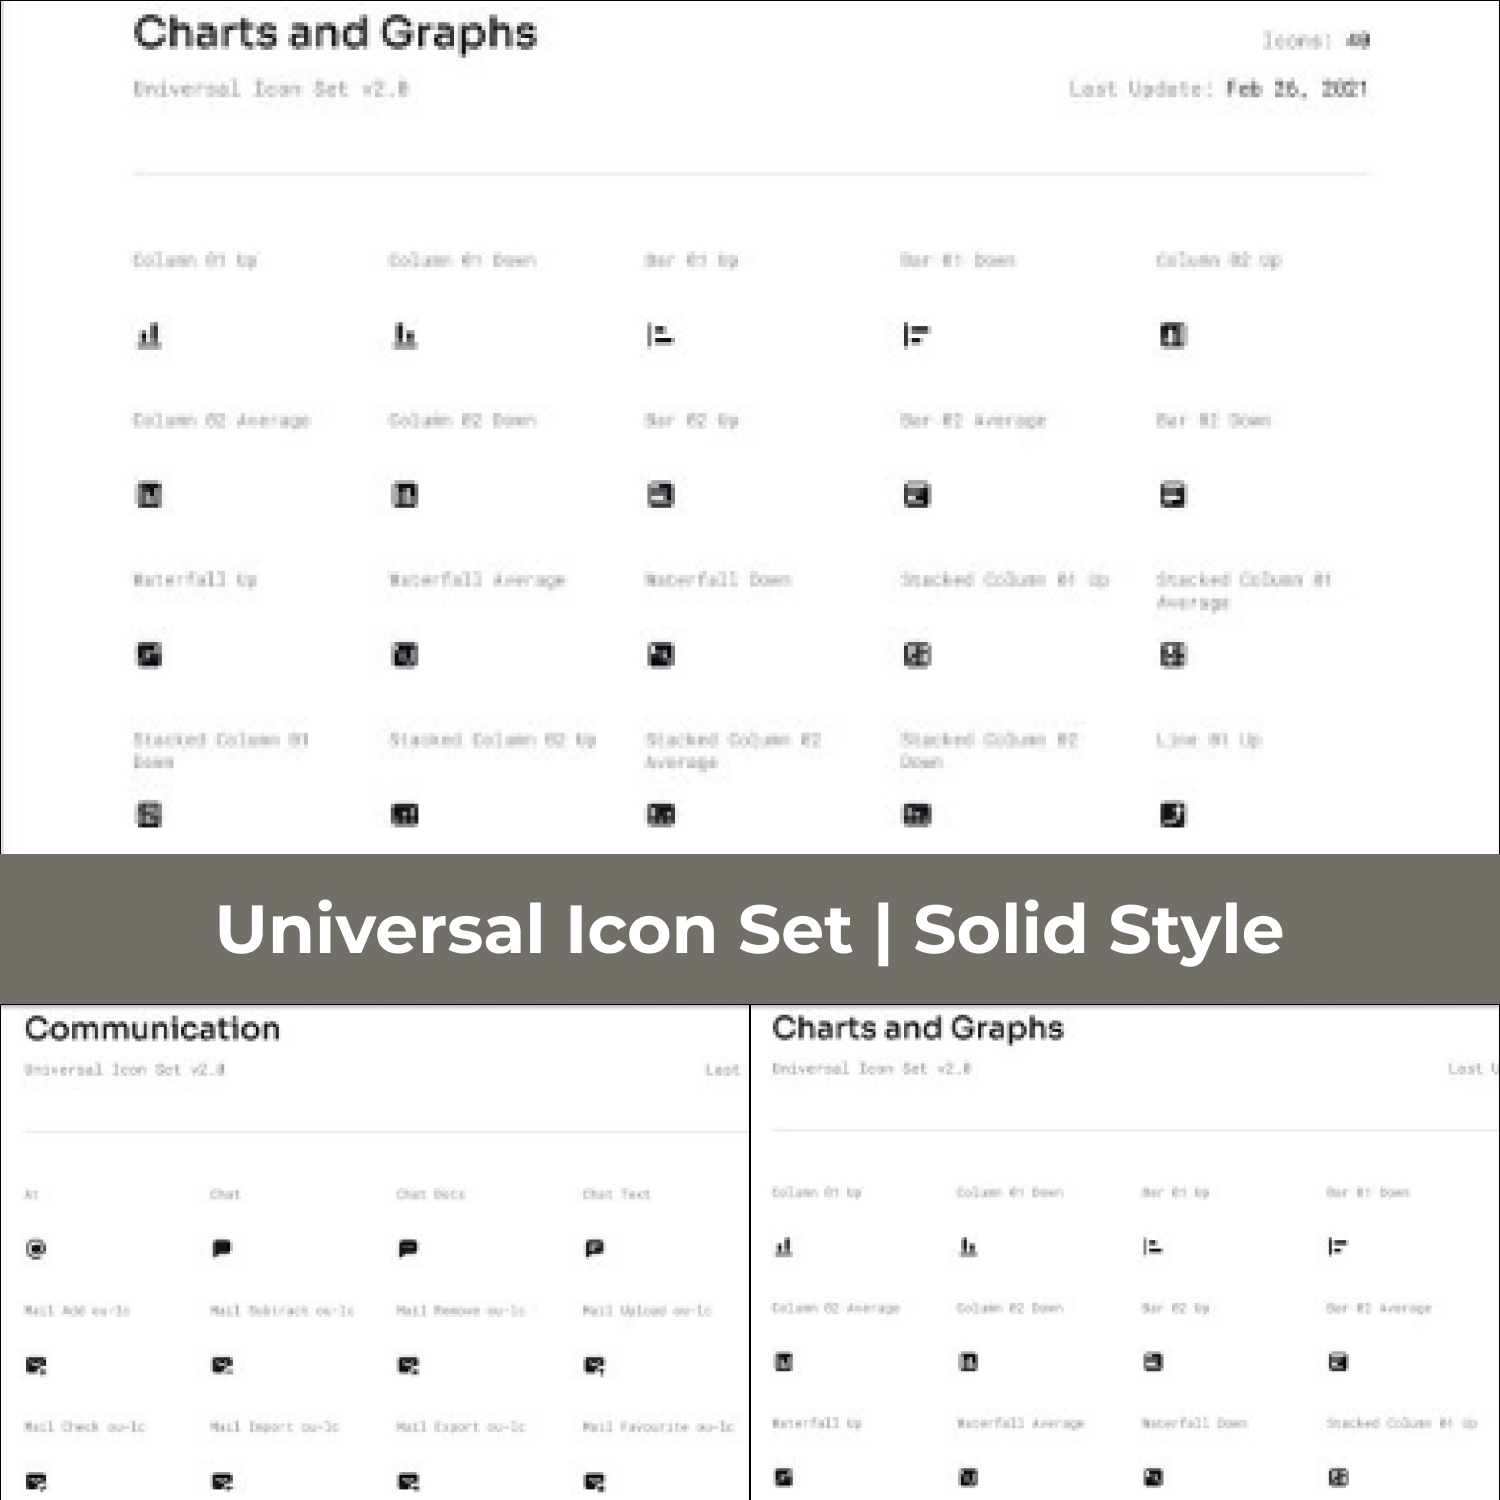 Universal Icon Set | Solid Style.